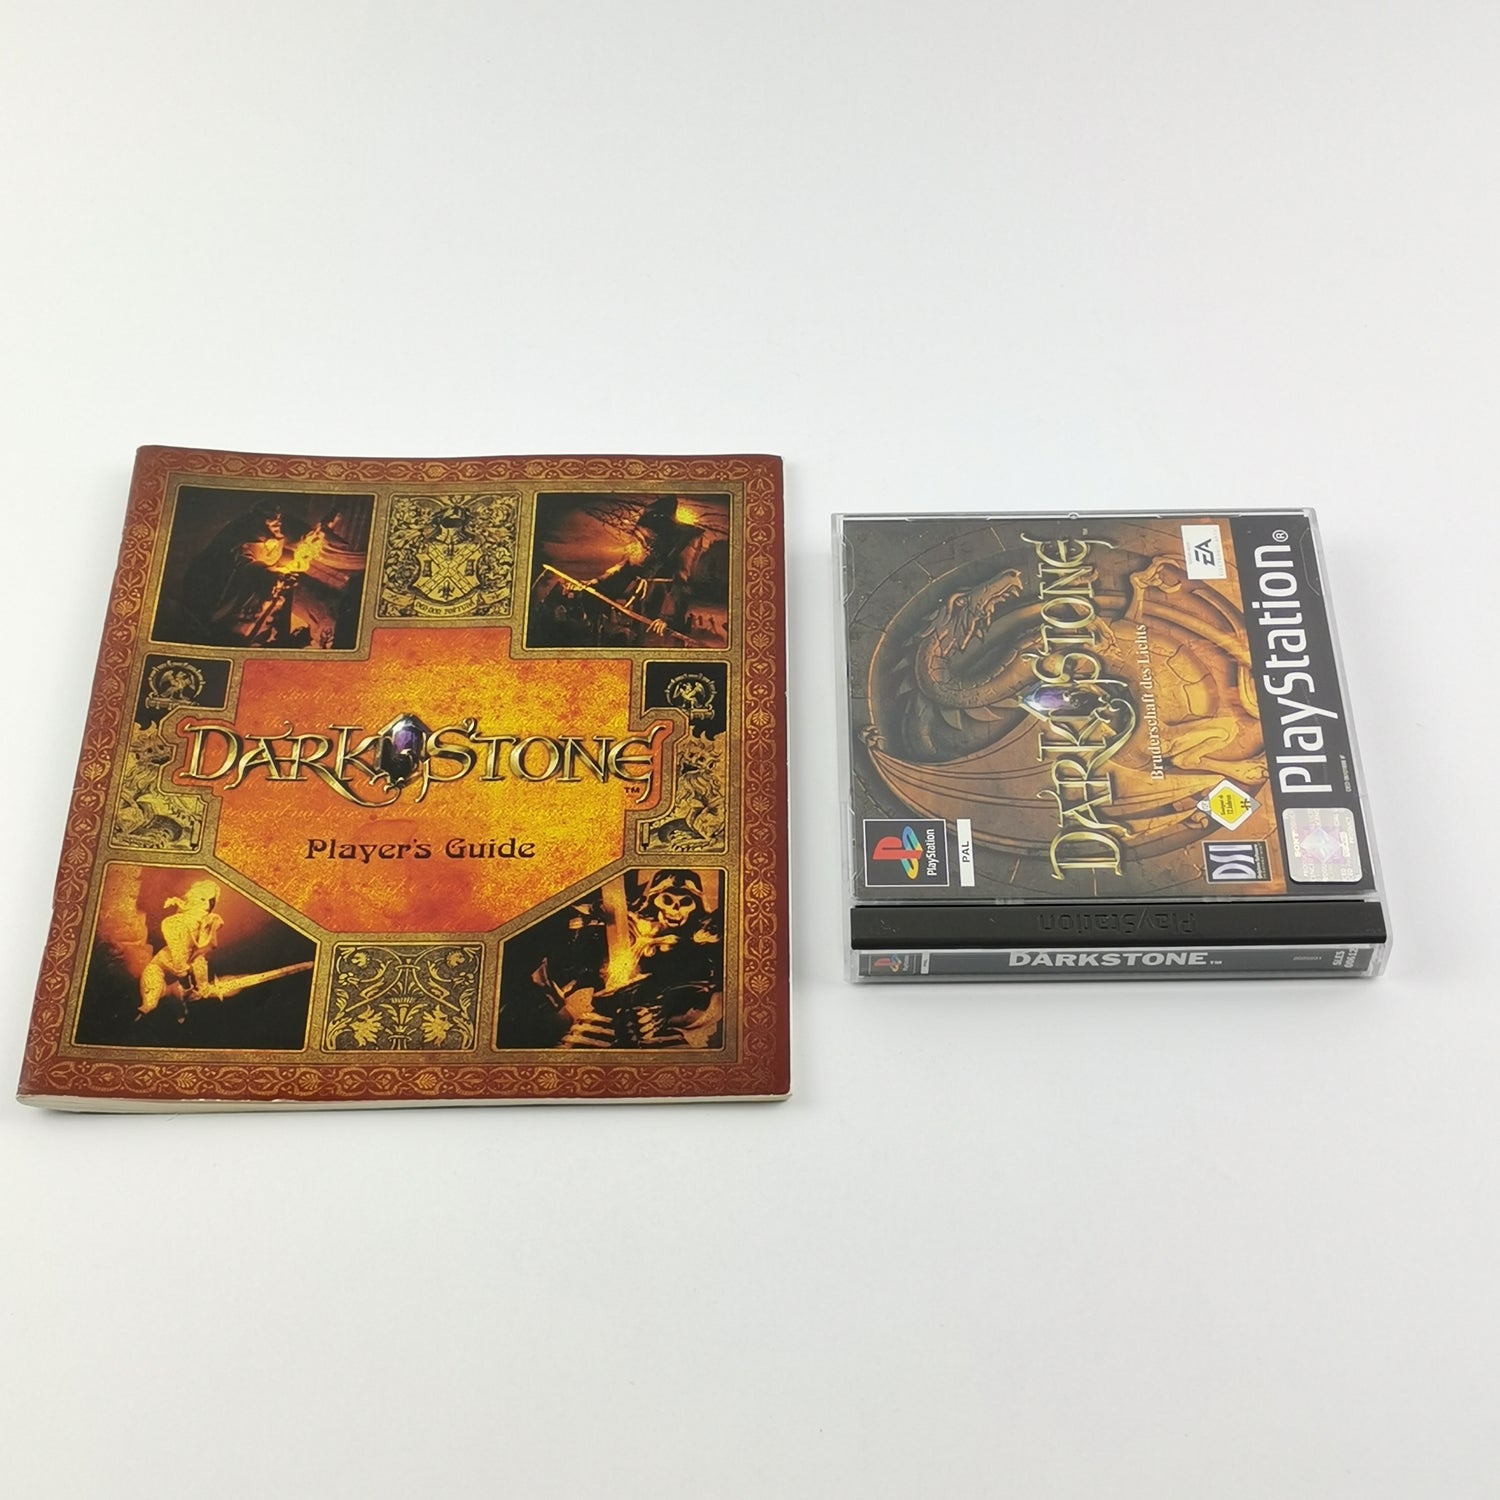 Sony Playstation 1 Game: Darkstone Brotherhood of Light + Players Guide PS1